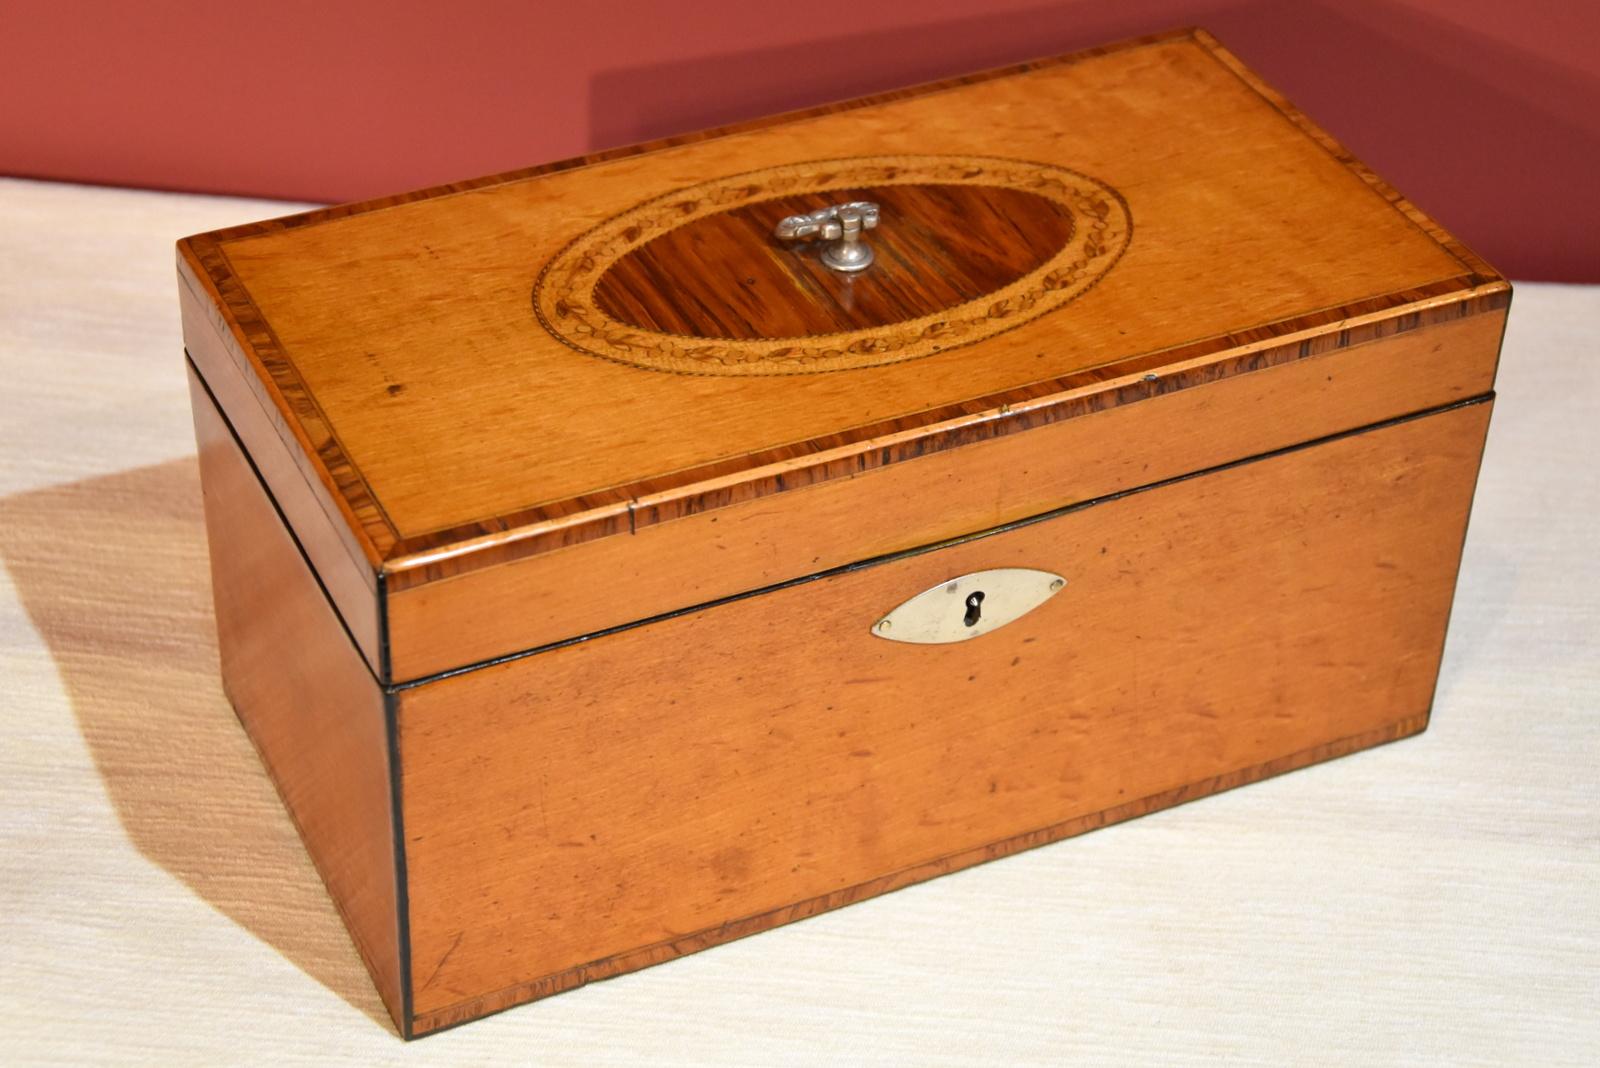 A fine George III satinwood inlaid tea caddy with kingwood tulipwood inlays and glass bowl

Measures: height 6